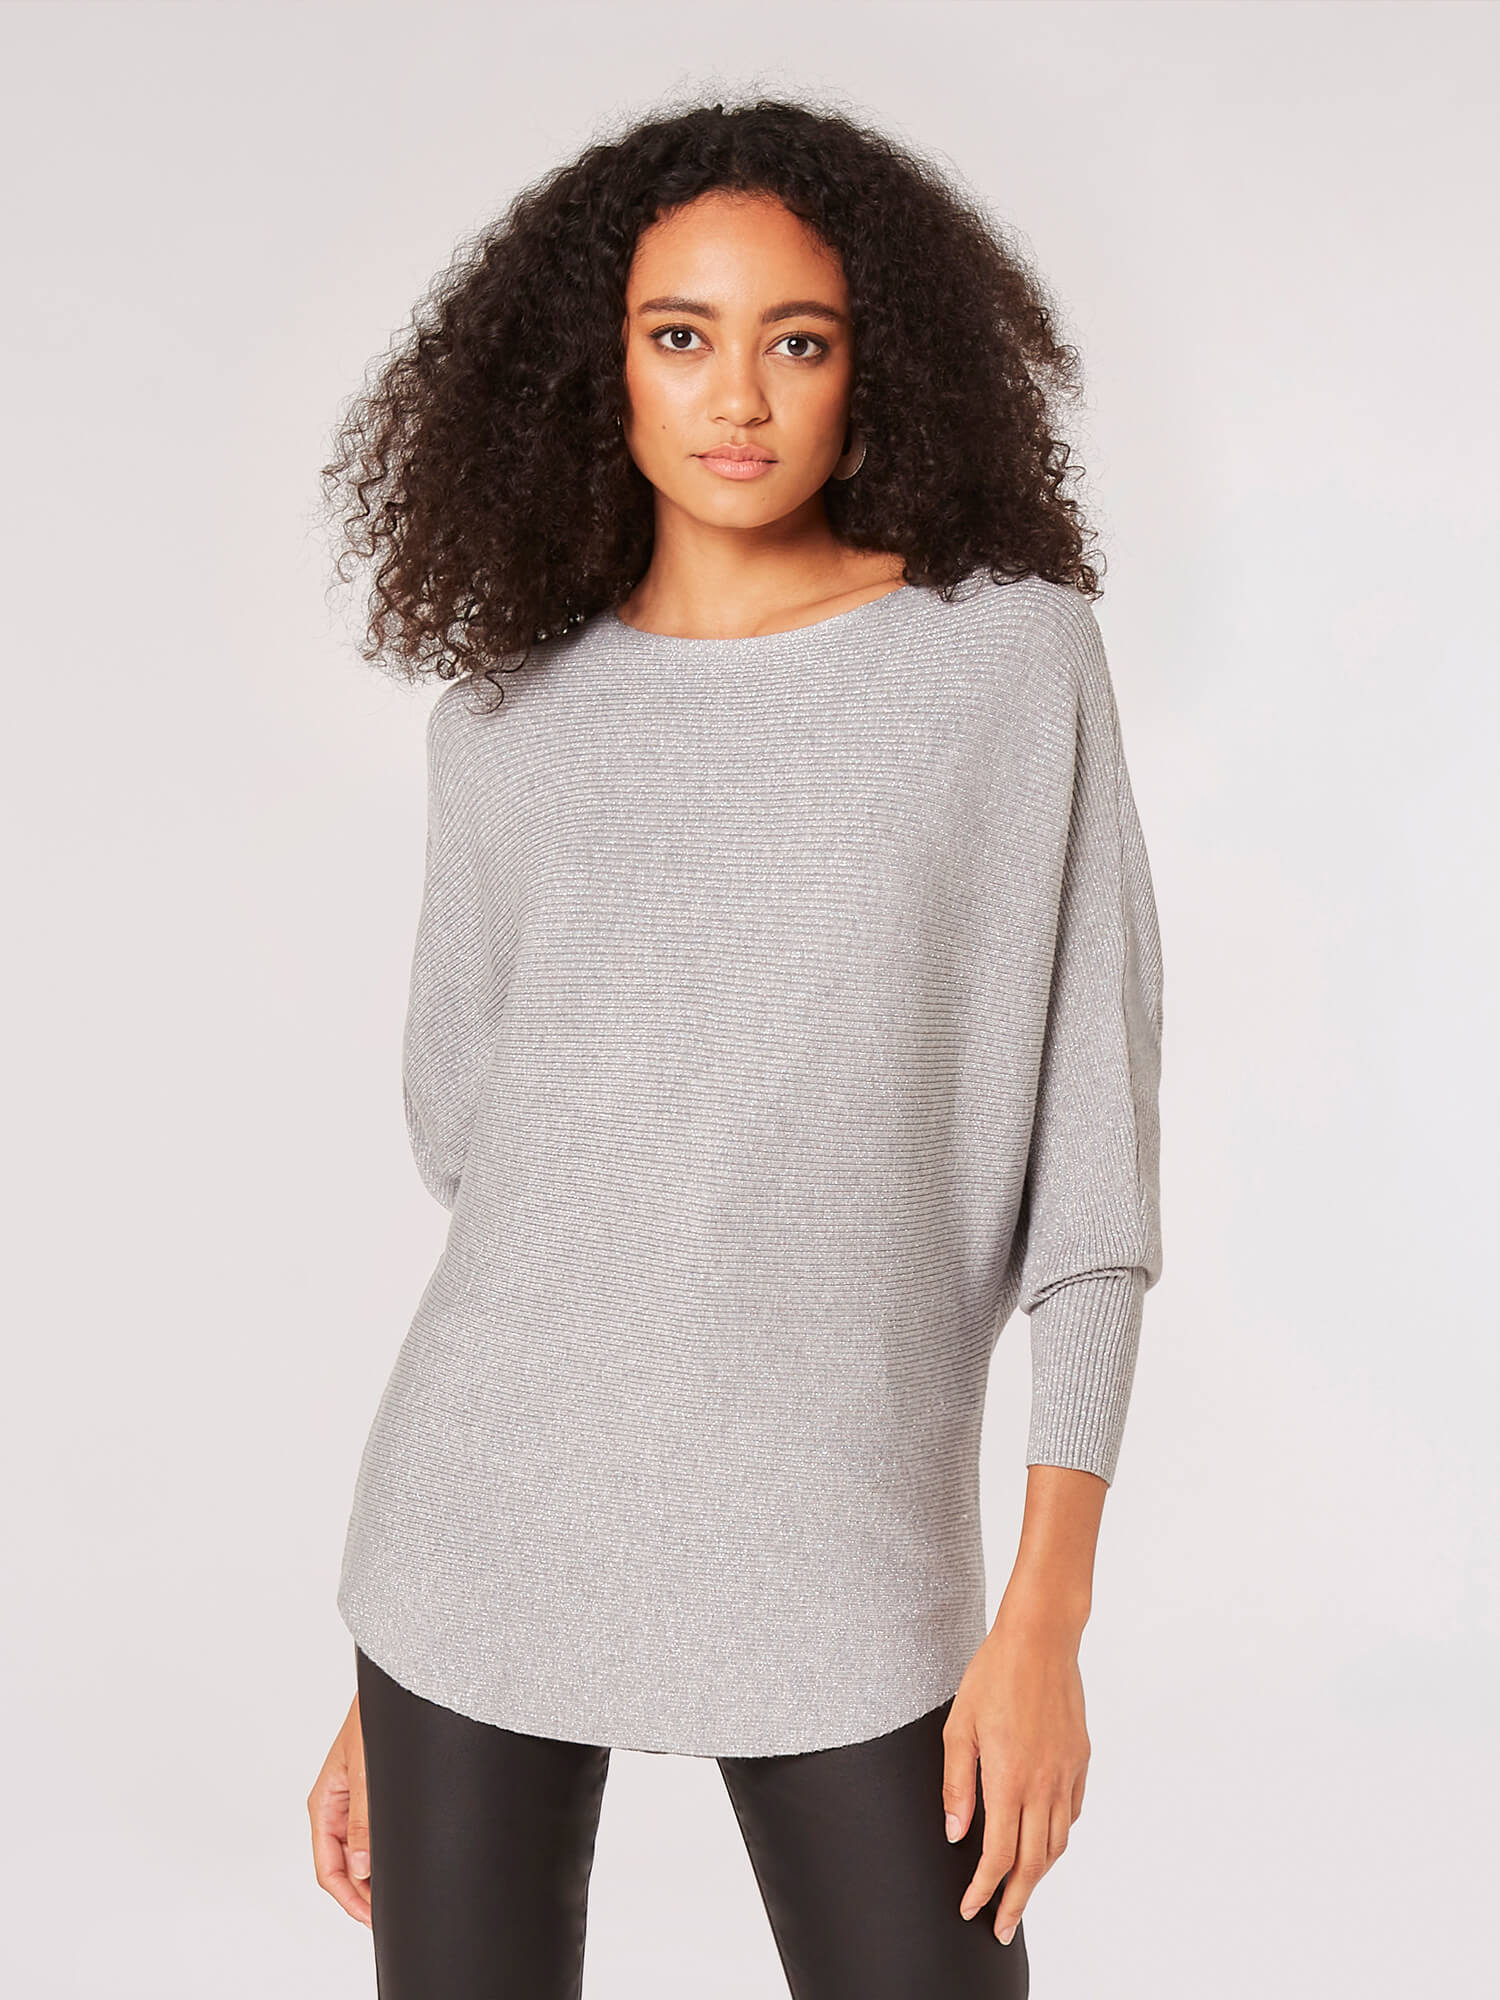 Batwing Ribbed Sparkle Top | Apricot Clothing